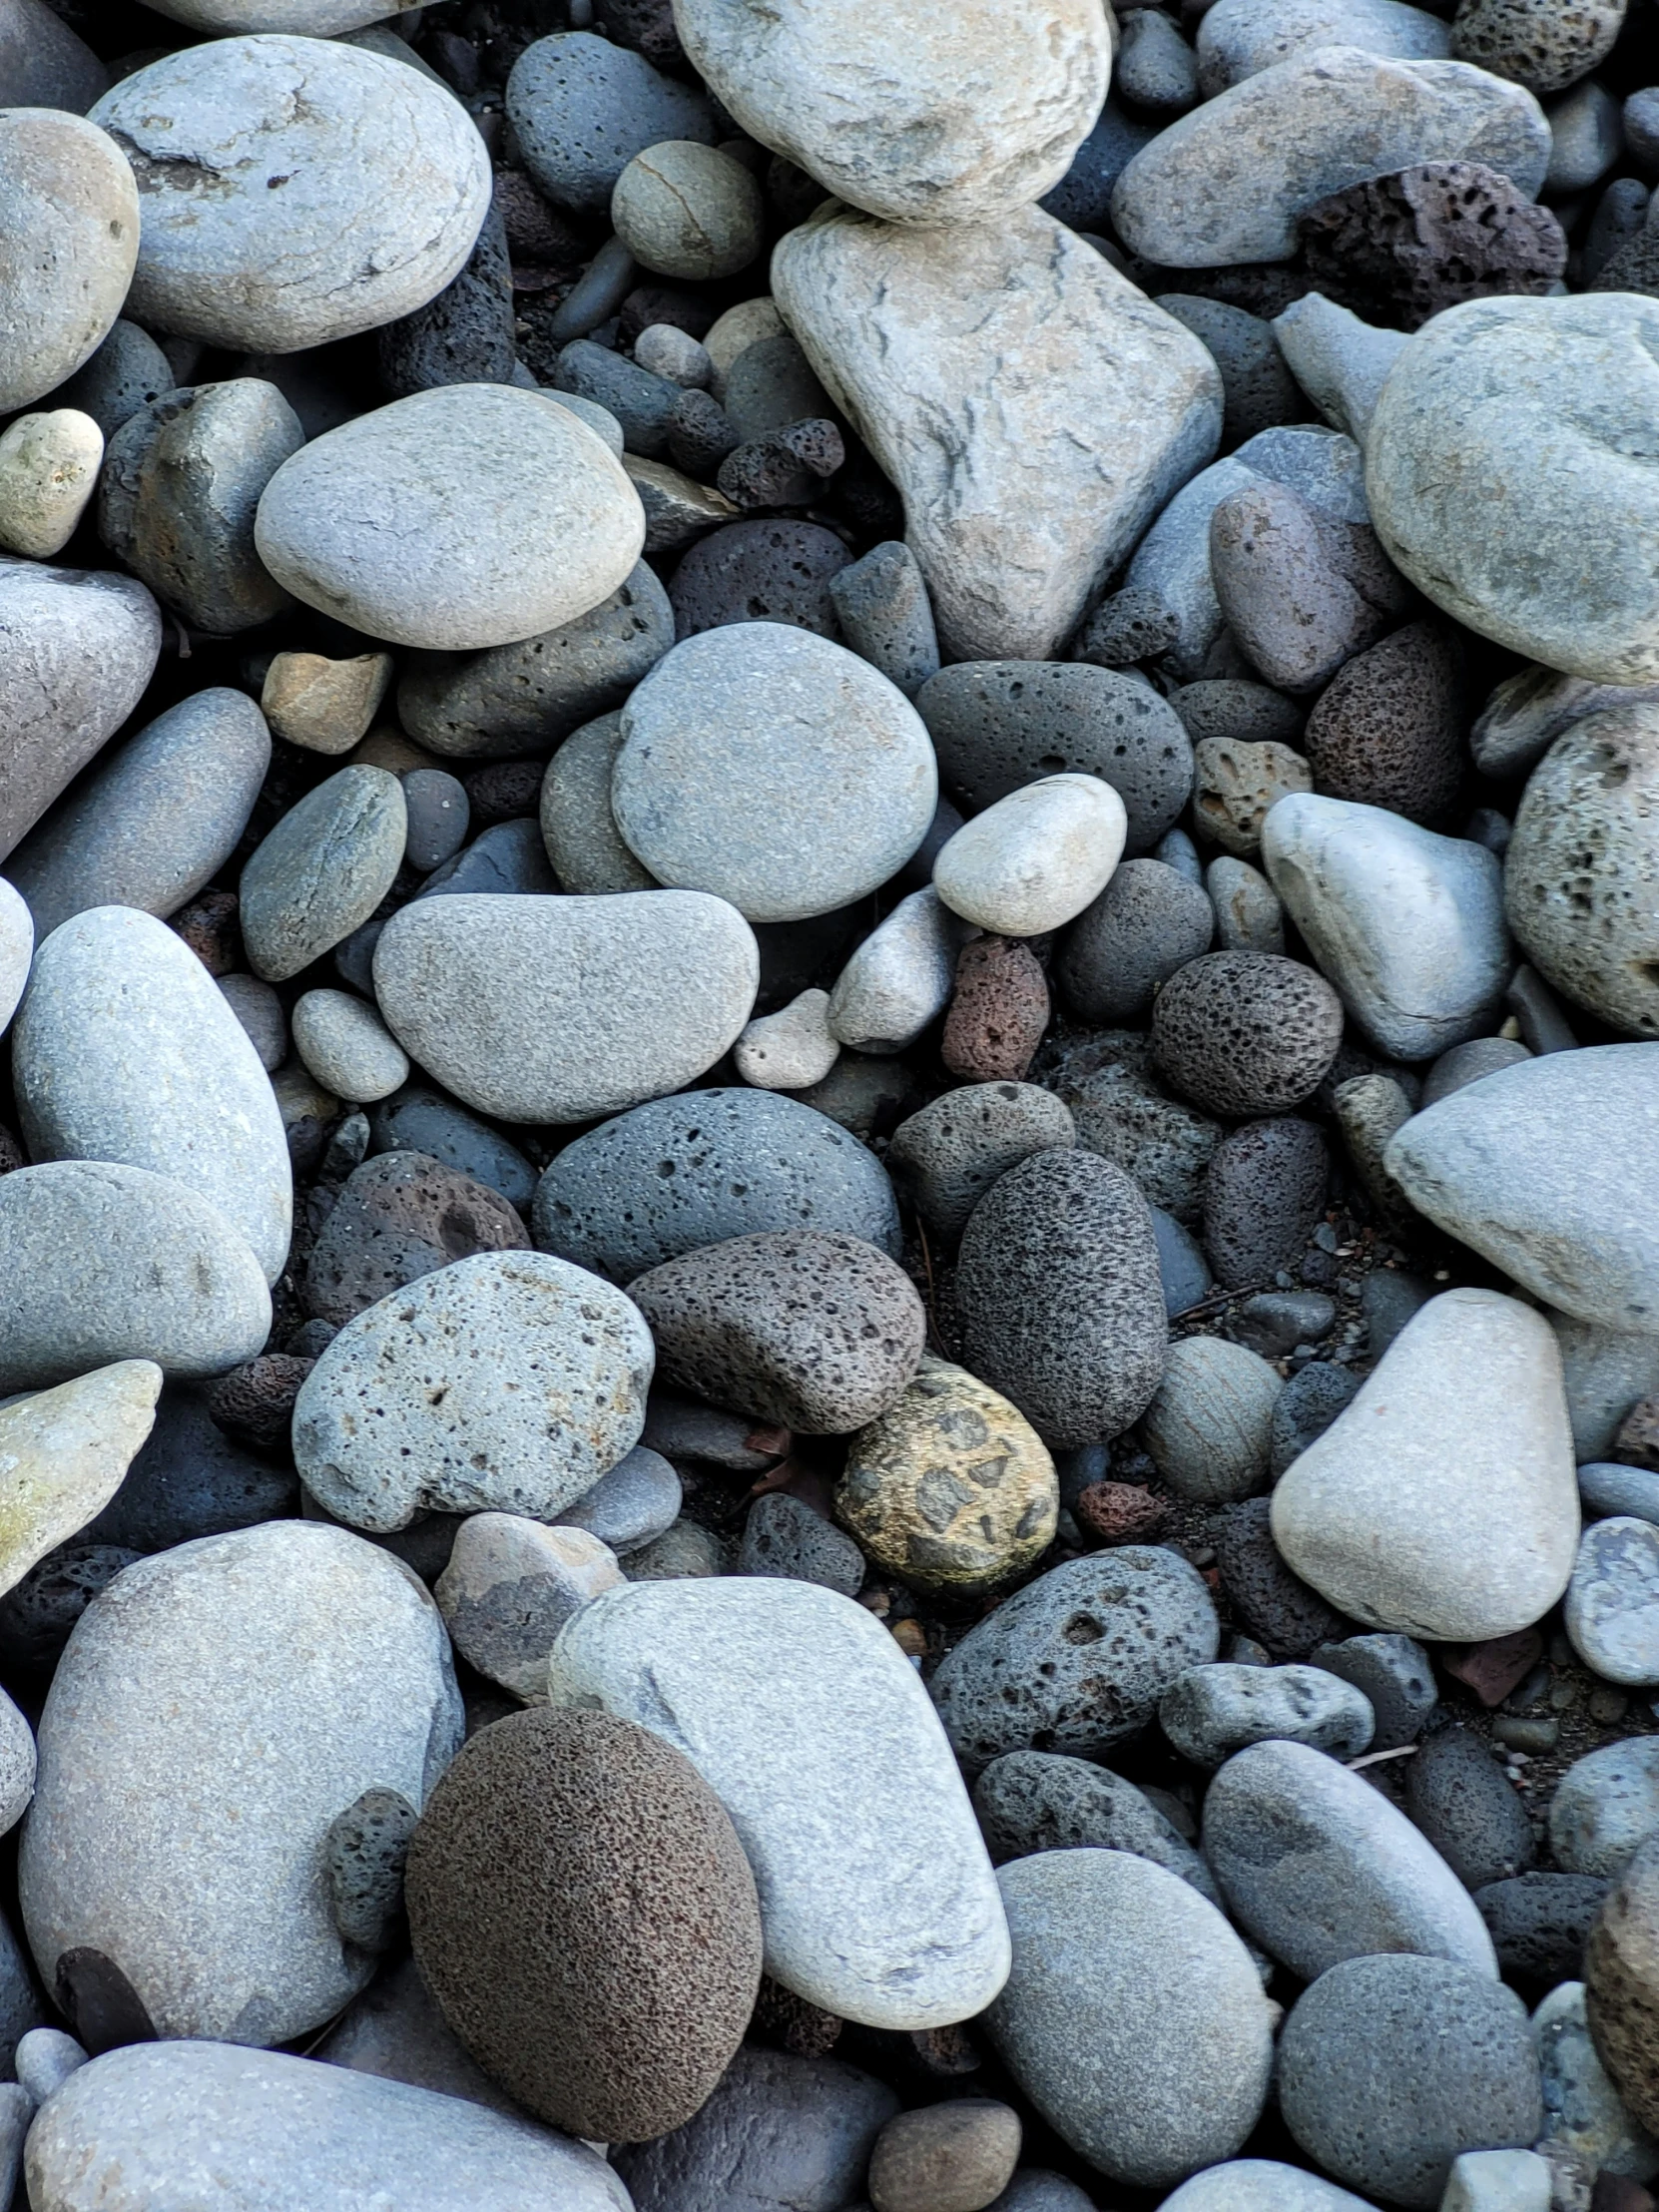 a close up of rocks and pebbles near water